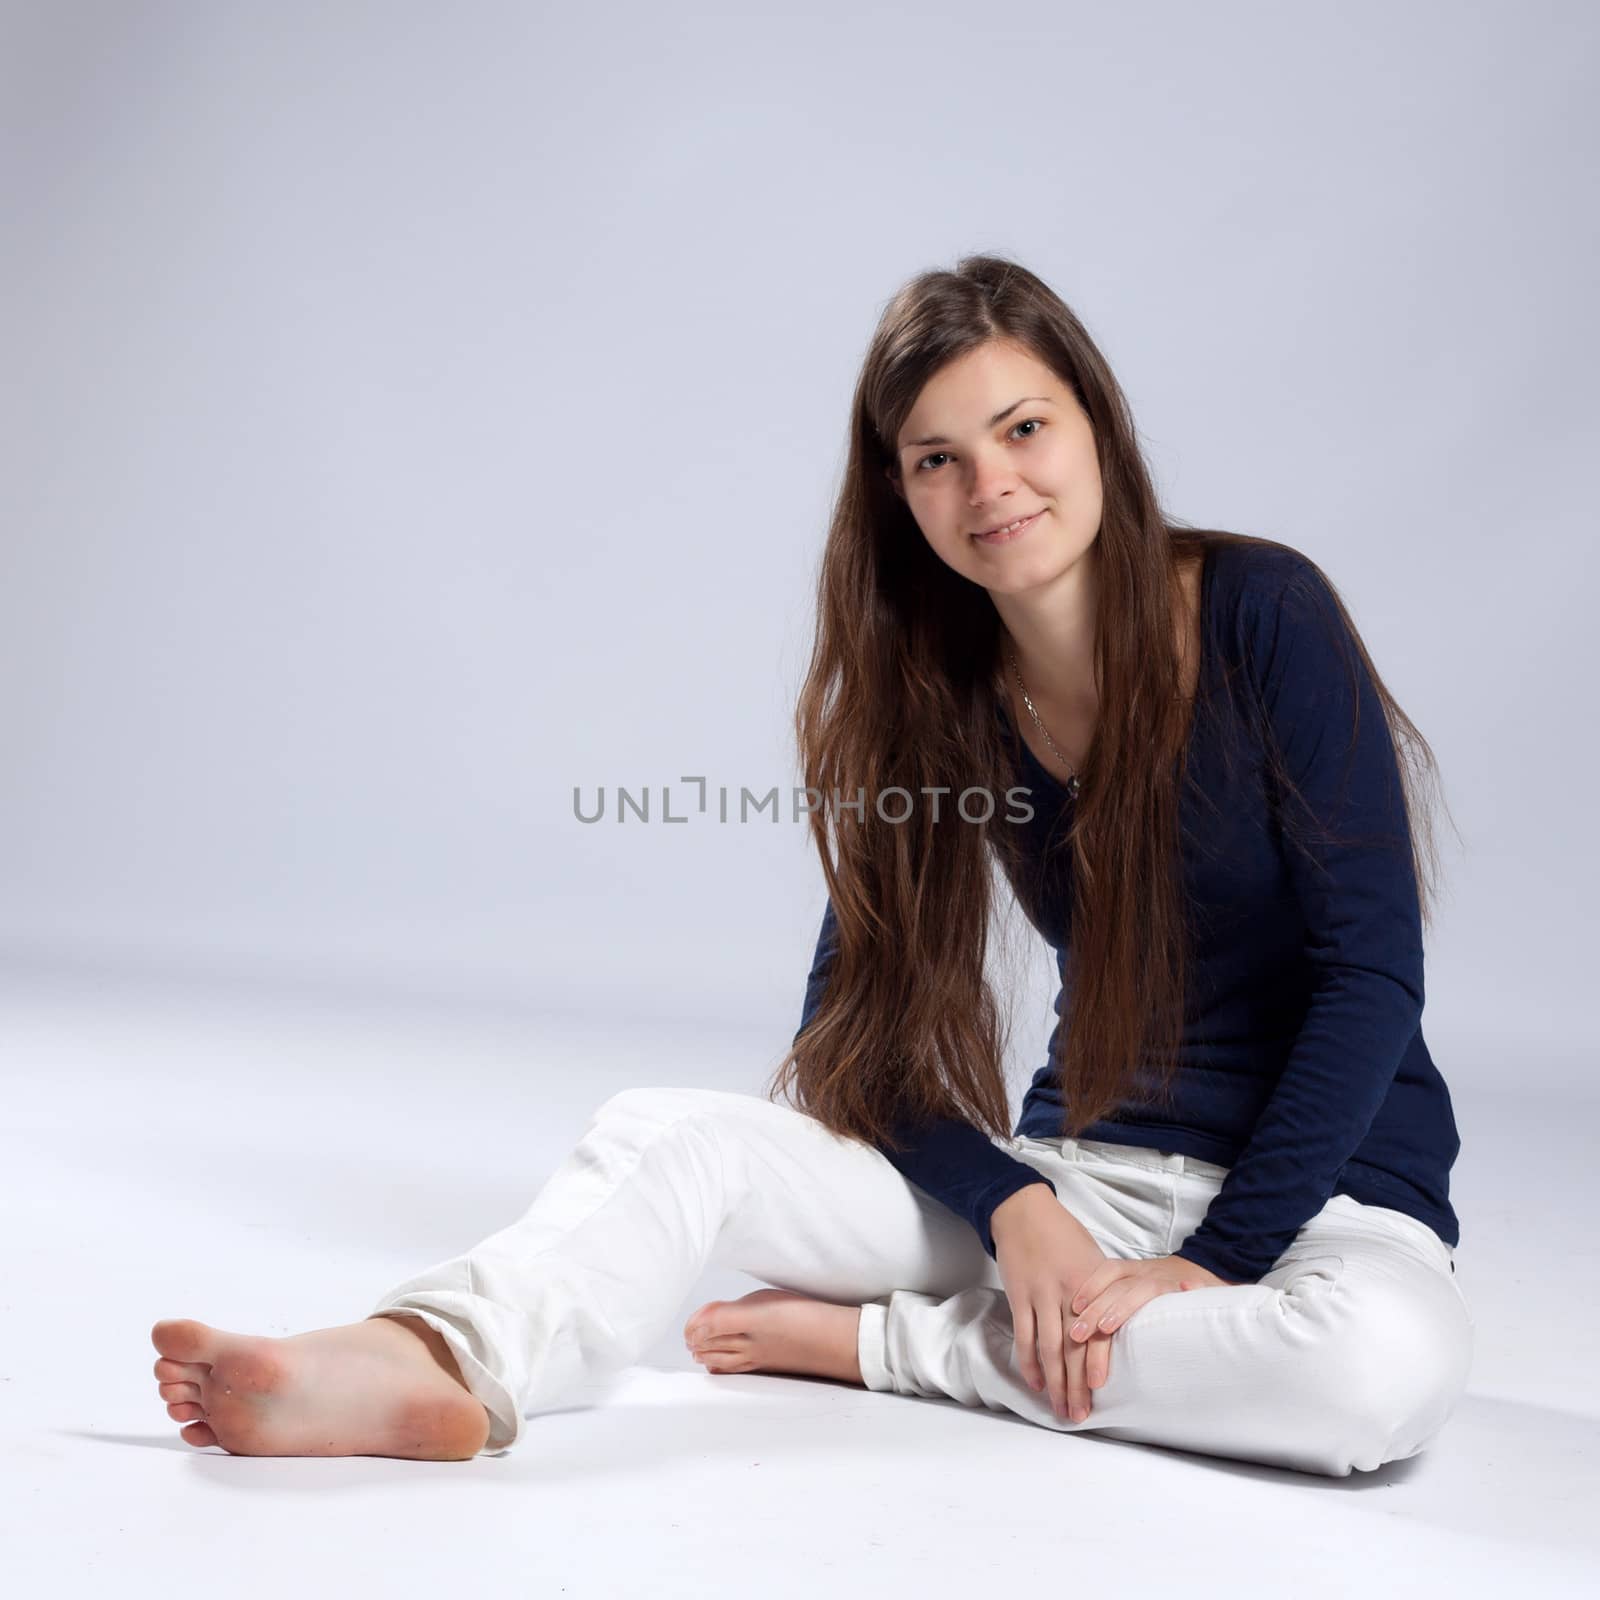 Young long-haired woman without makeup in white jeans and a blue shirt sitting on the floor